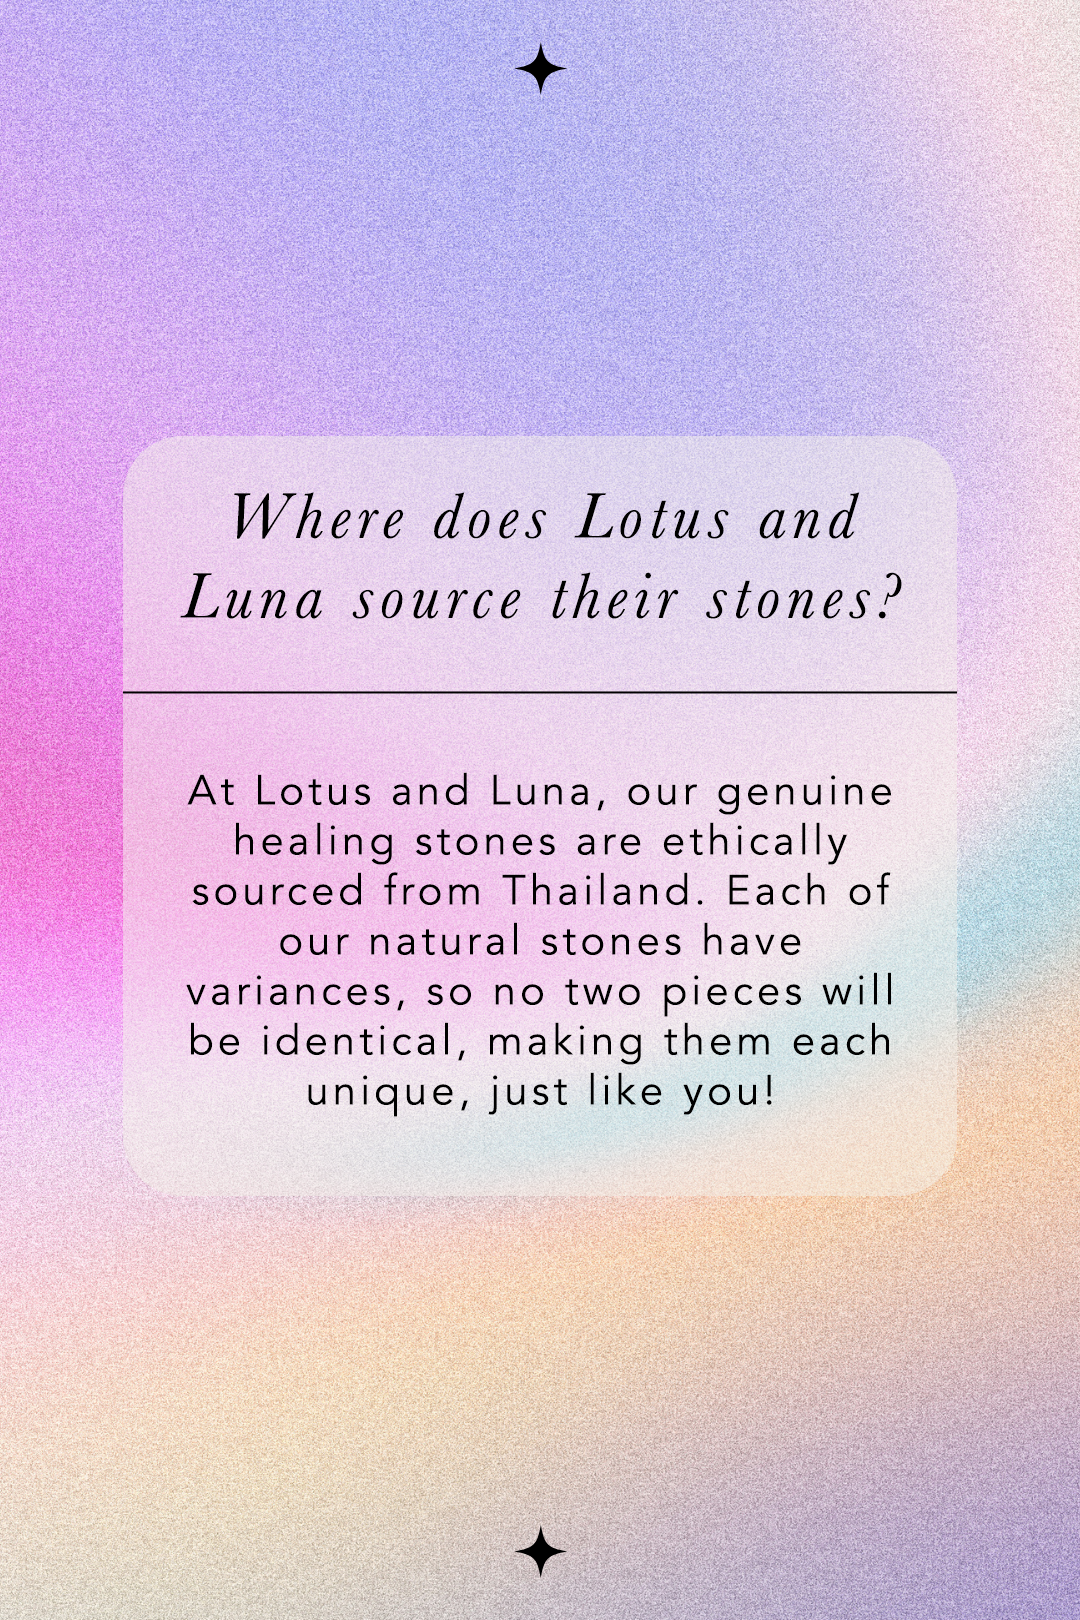 Where does Lotus and Luna source their stones? At Lotus and Luna, our genuine healing stones are ethically sourced from Thailand. Each of our natural stones have variances, so no two pieces will be identical, making them each unique, just like you!